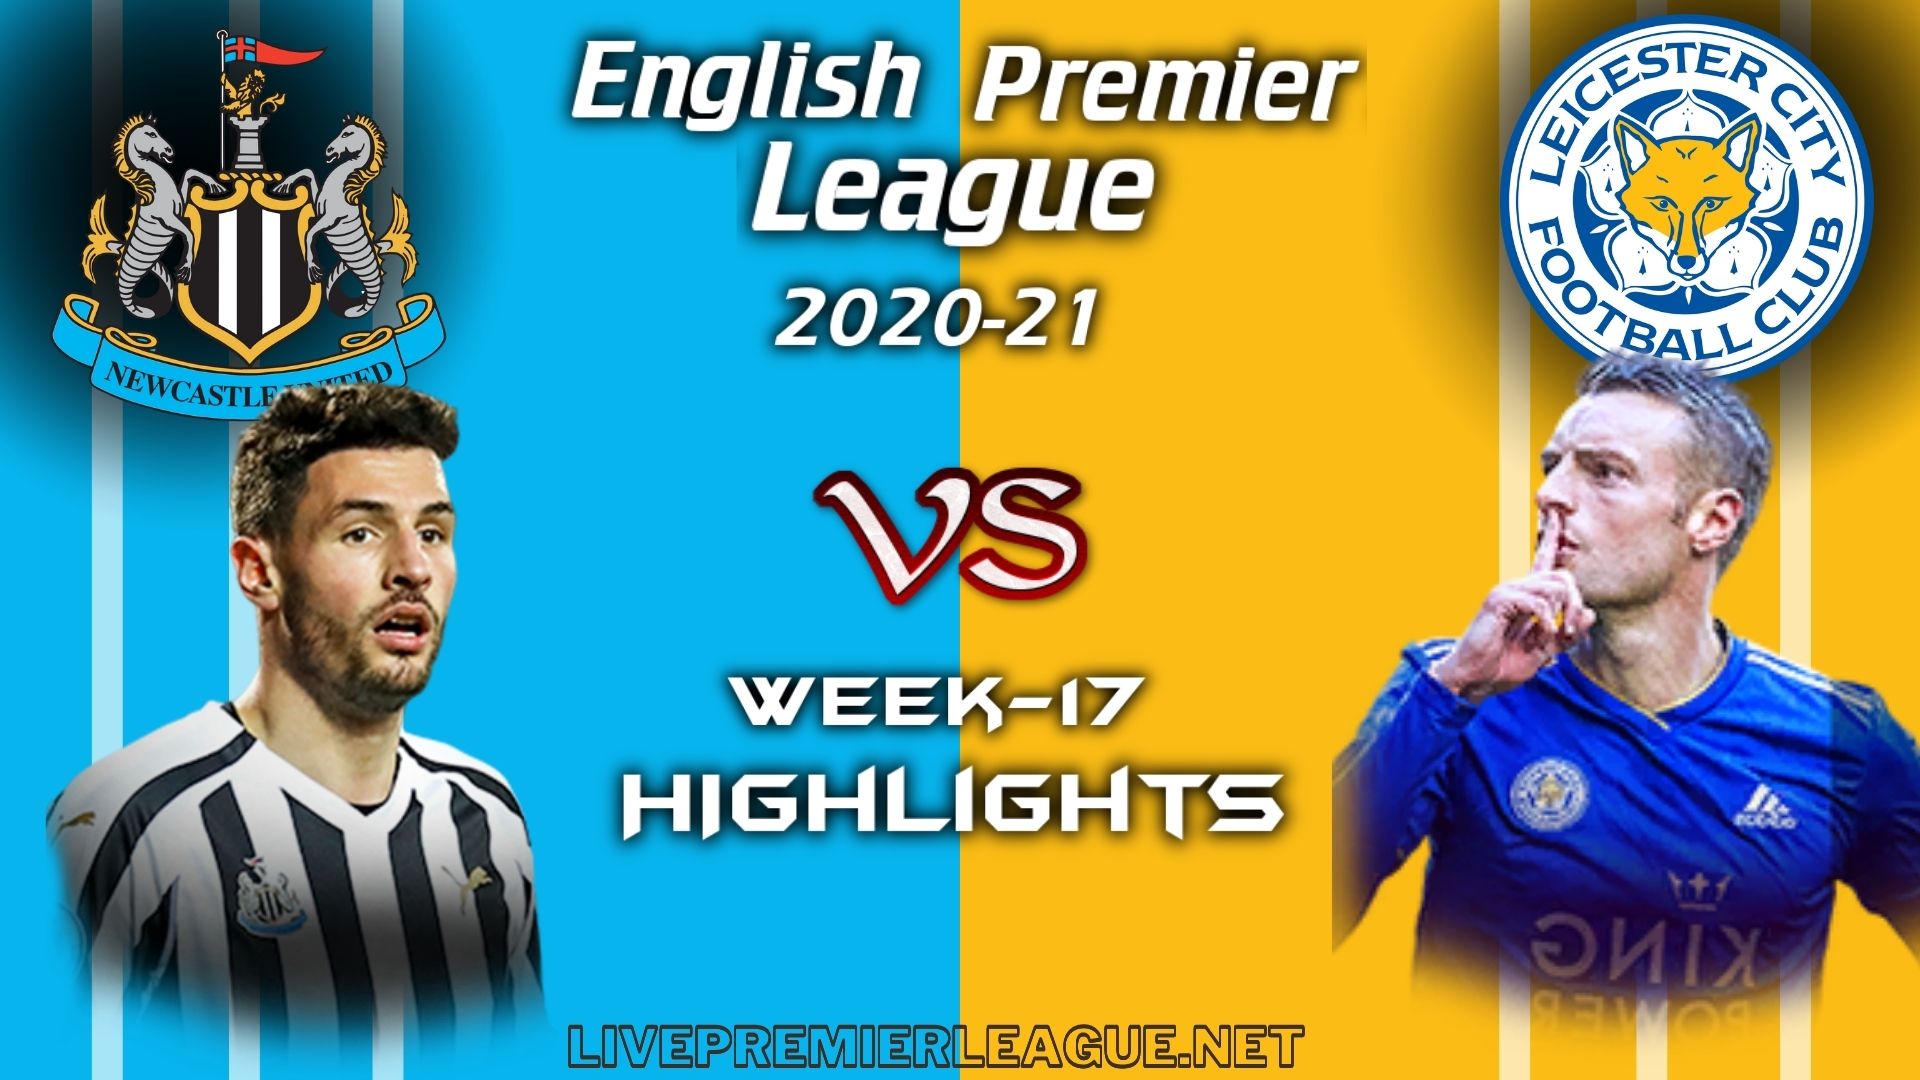 Newcastle United Vs Leicester City Highlights 2021 EPL Week 17